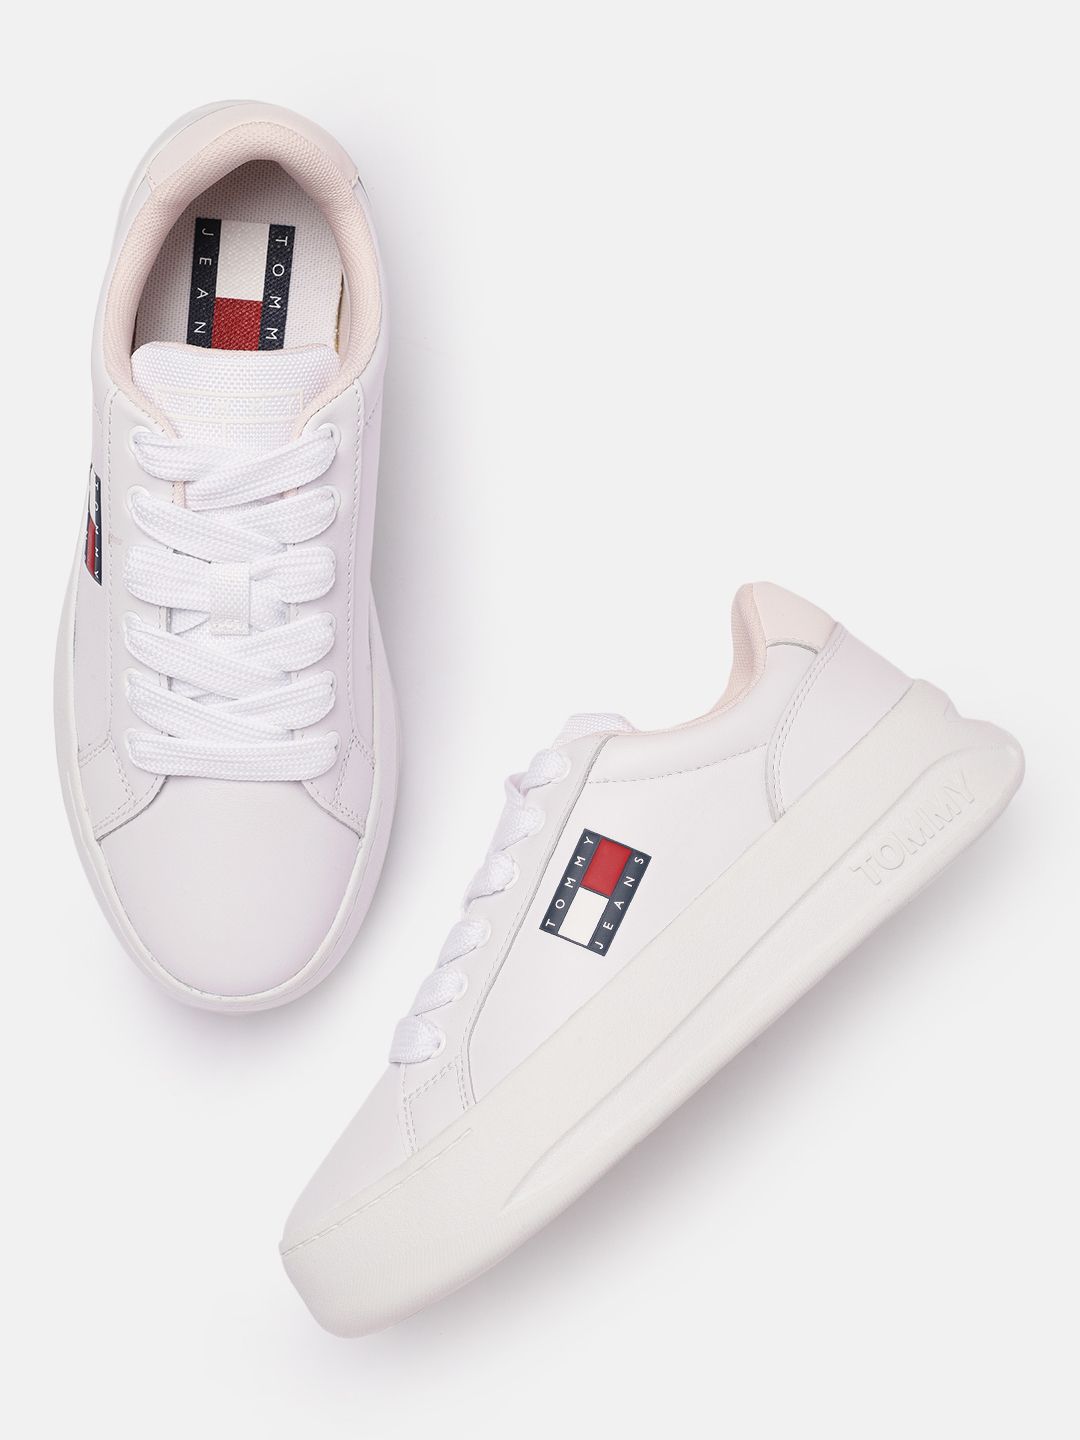 Tommy Hilfiger Women White Solid Leather Regular City Flatform Sneakers Price in India